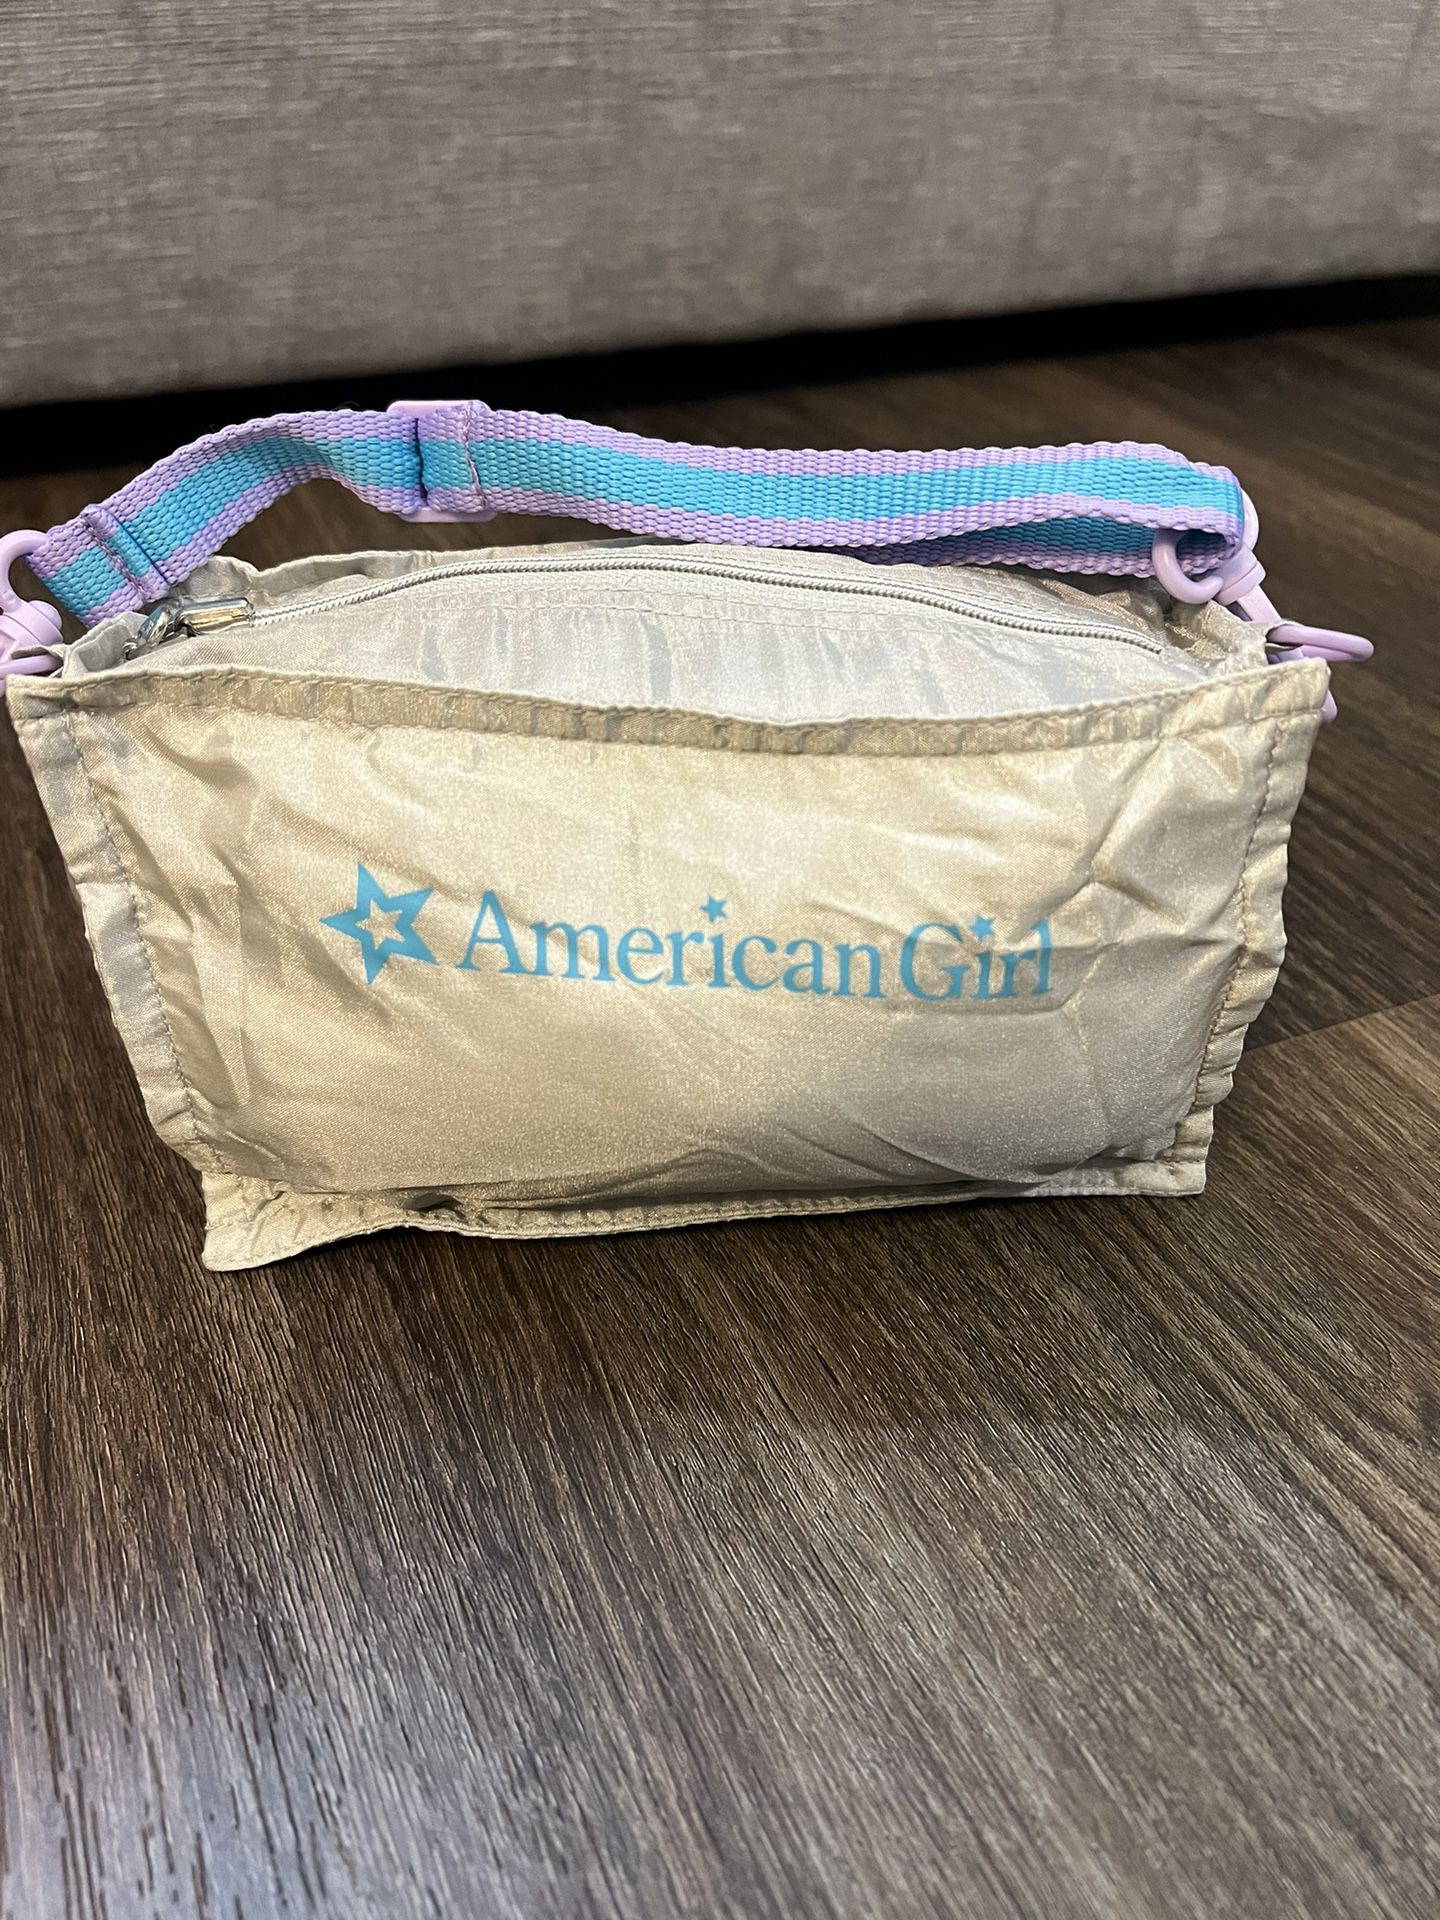 American Girl doll Sleeping Bags For 2 Dolls And A Child Size To Match 